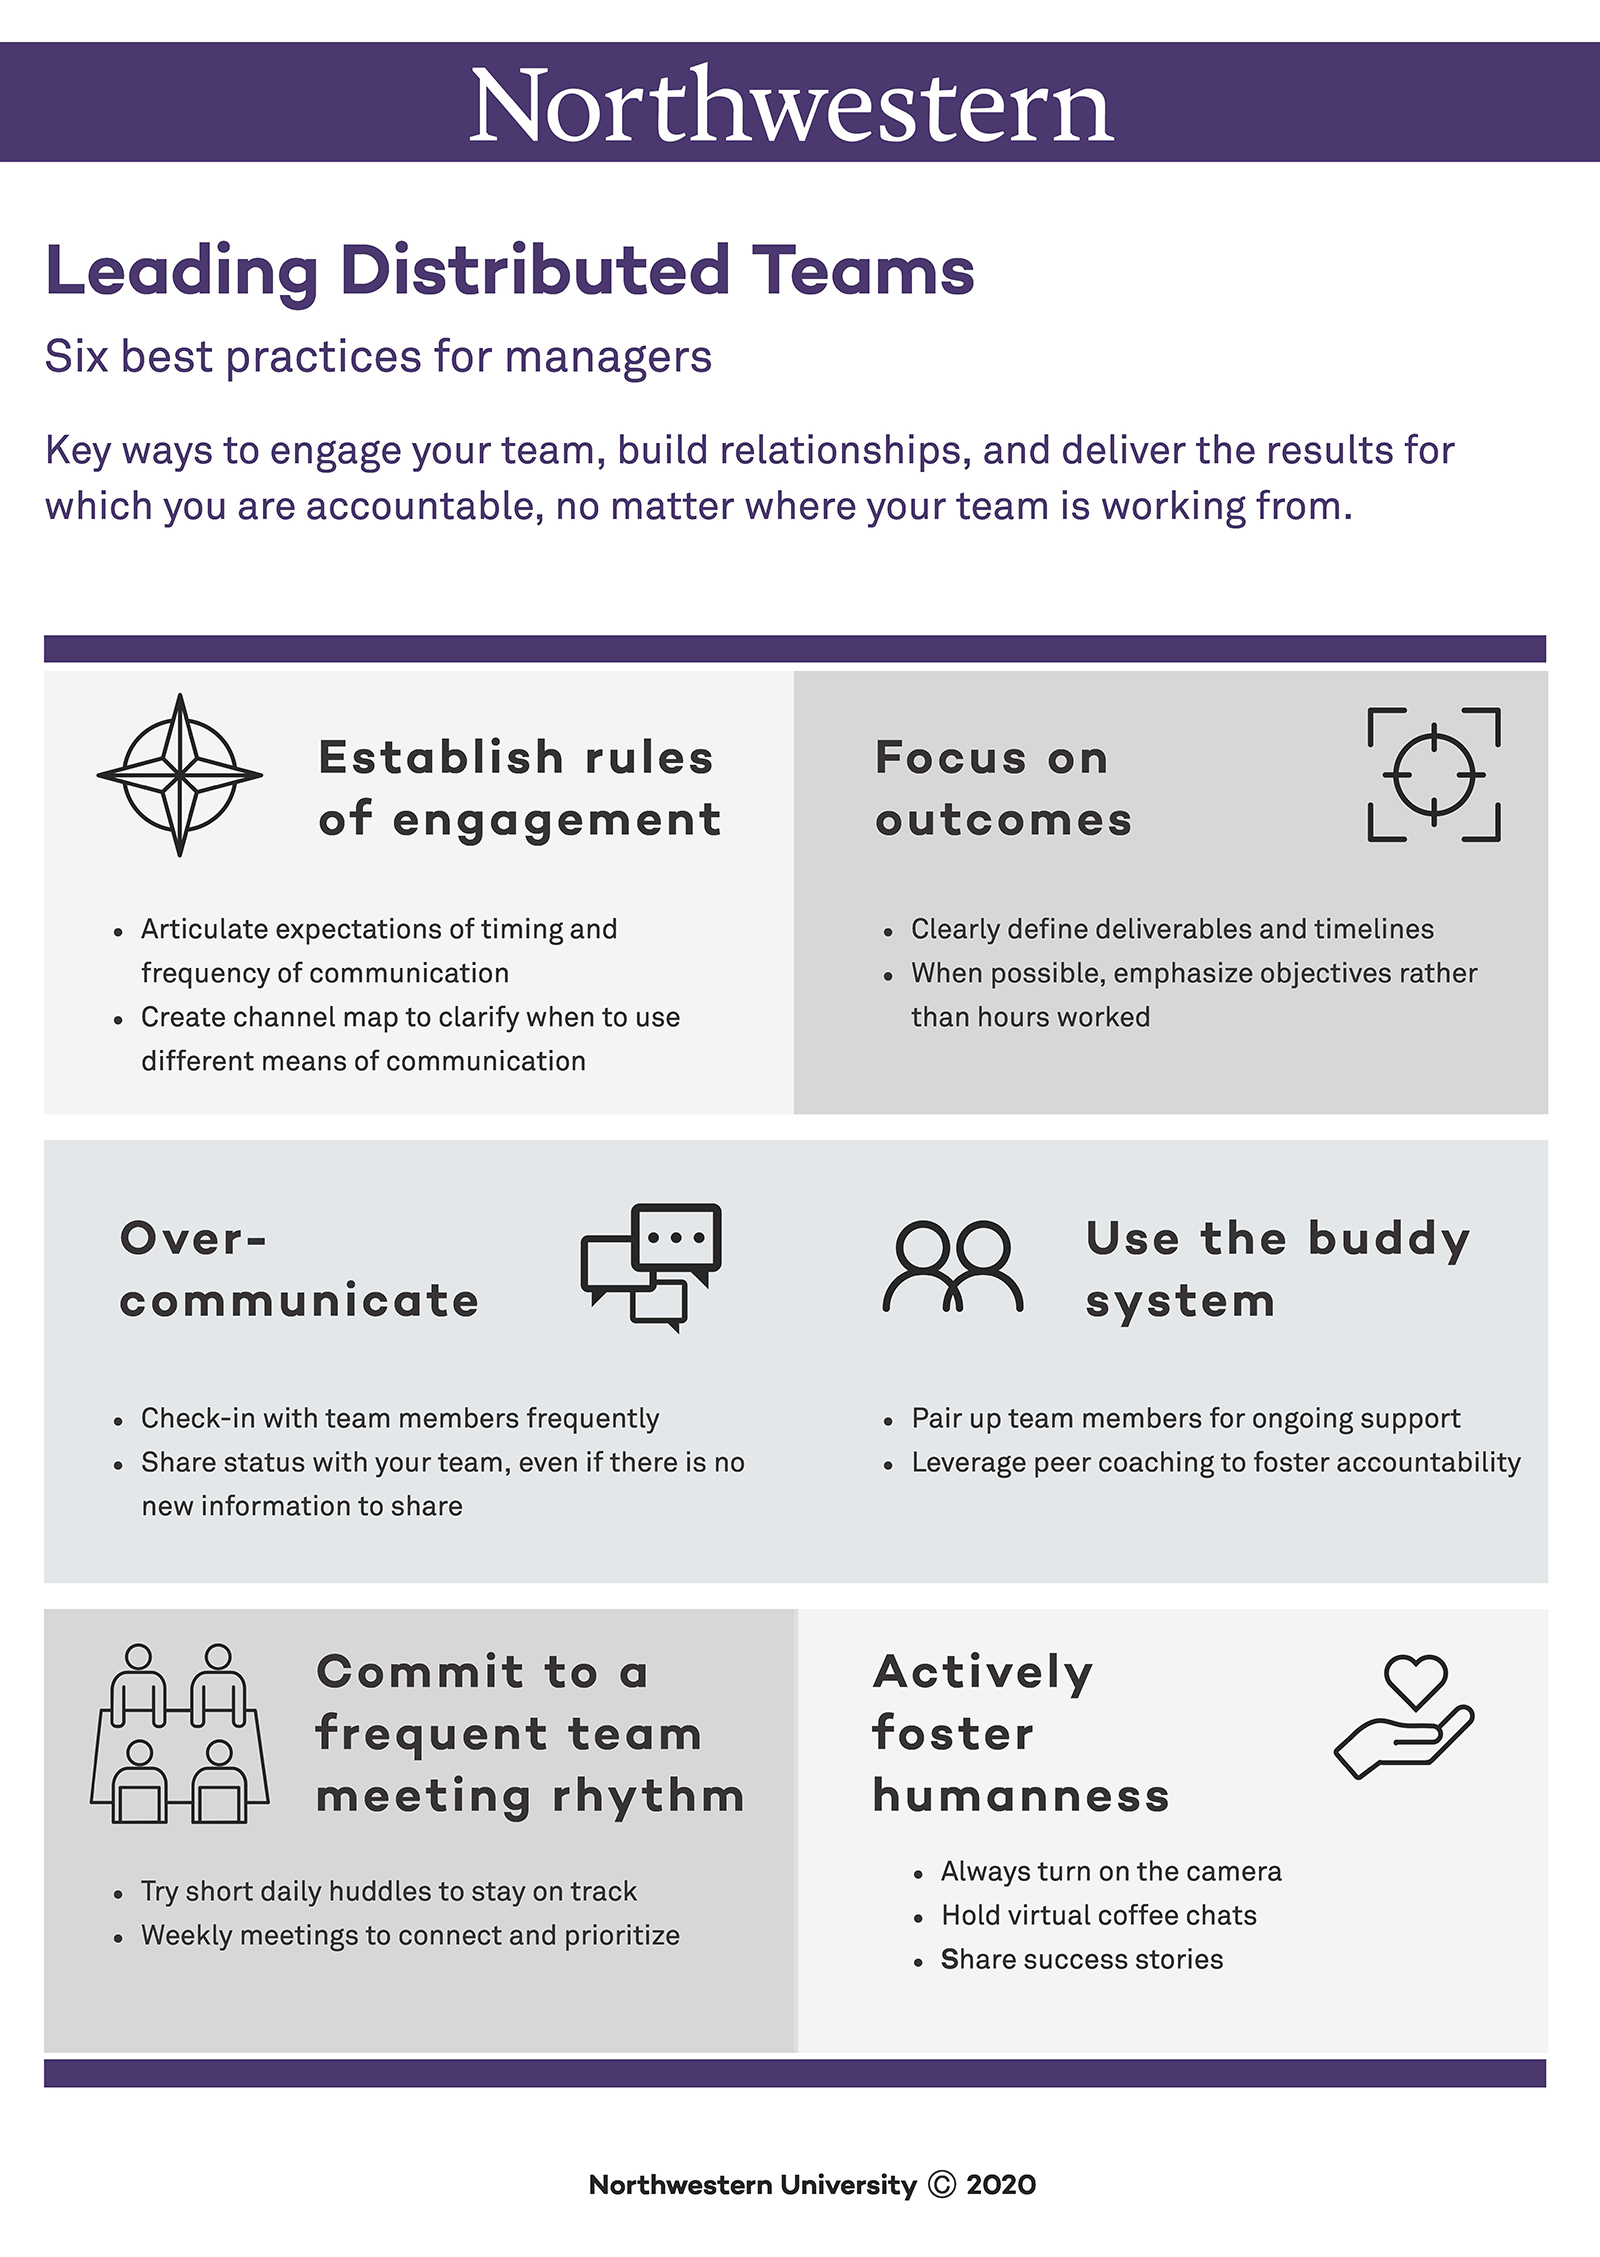 six best practices for leading distributed teams info graphic